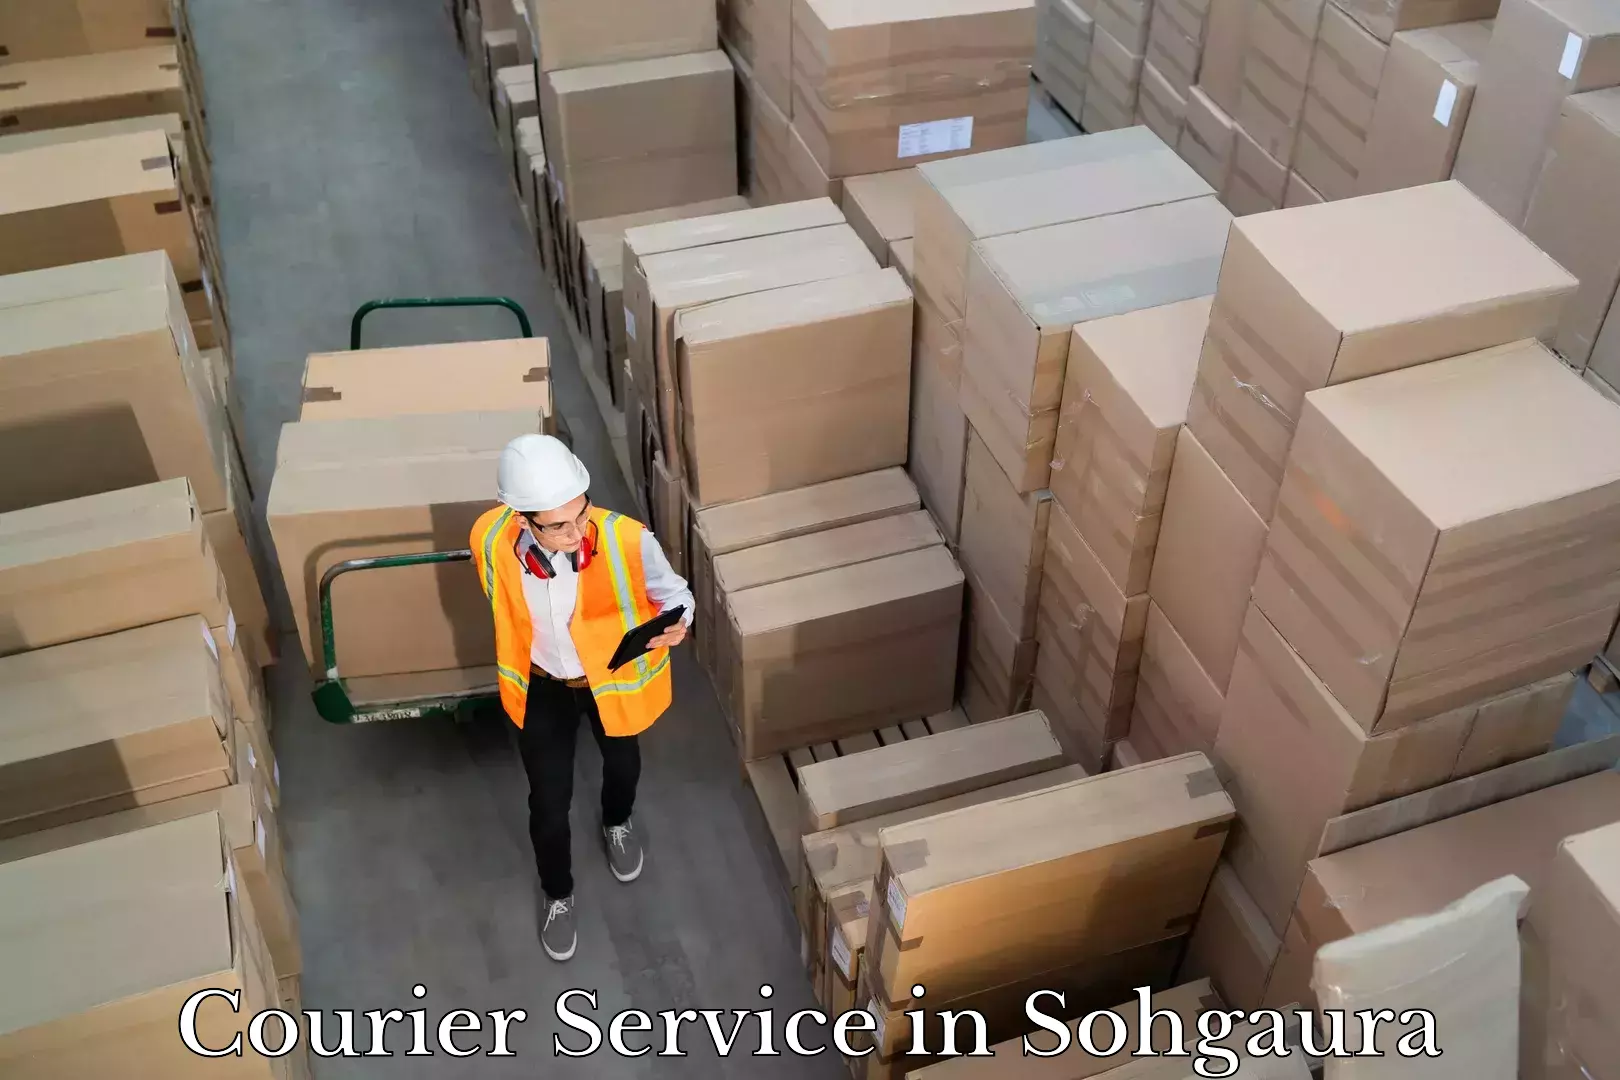 Express delivery solutions in Sohgaura